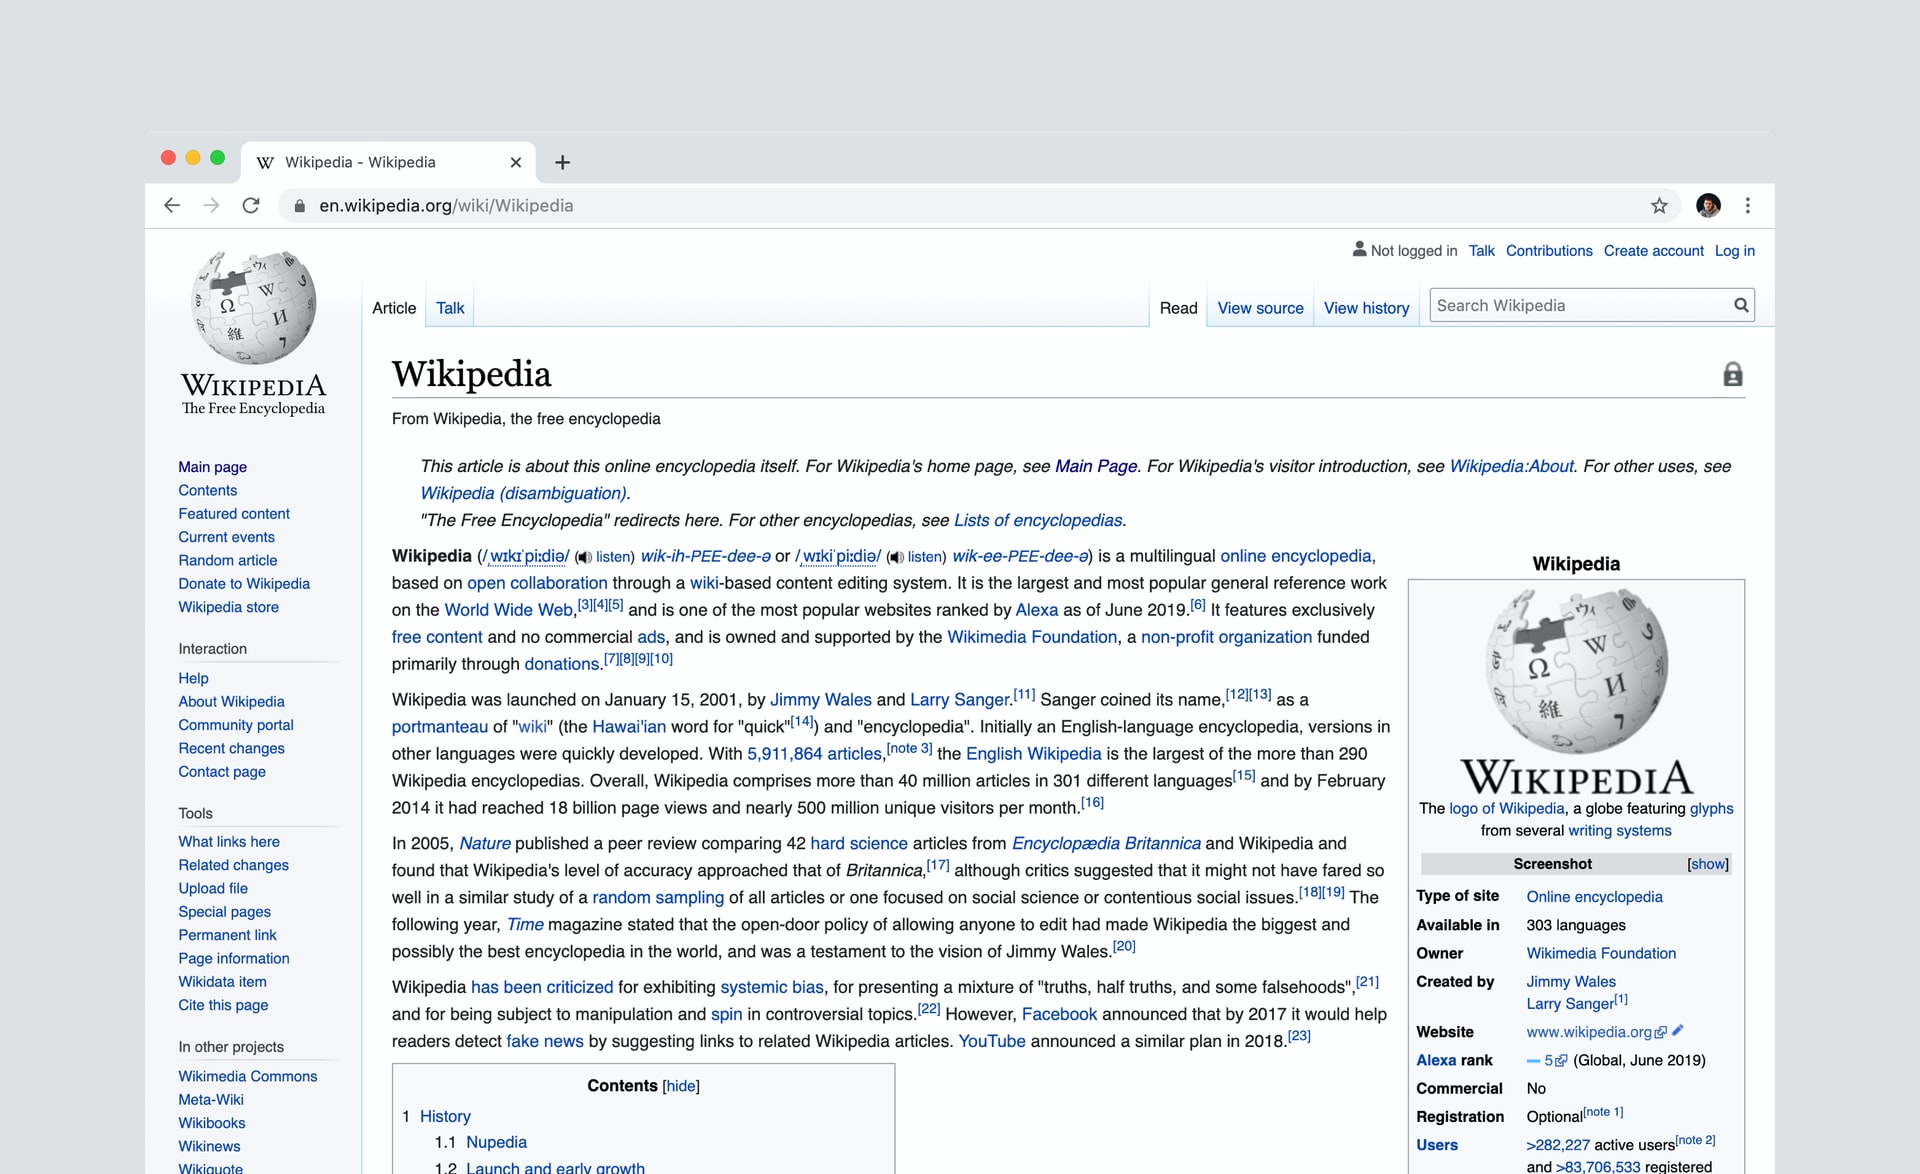 Lesser known Facts About Wikipedia You Should Know